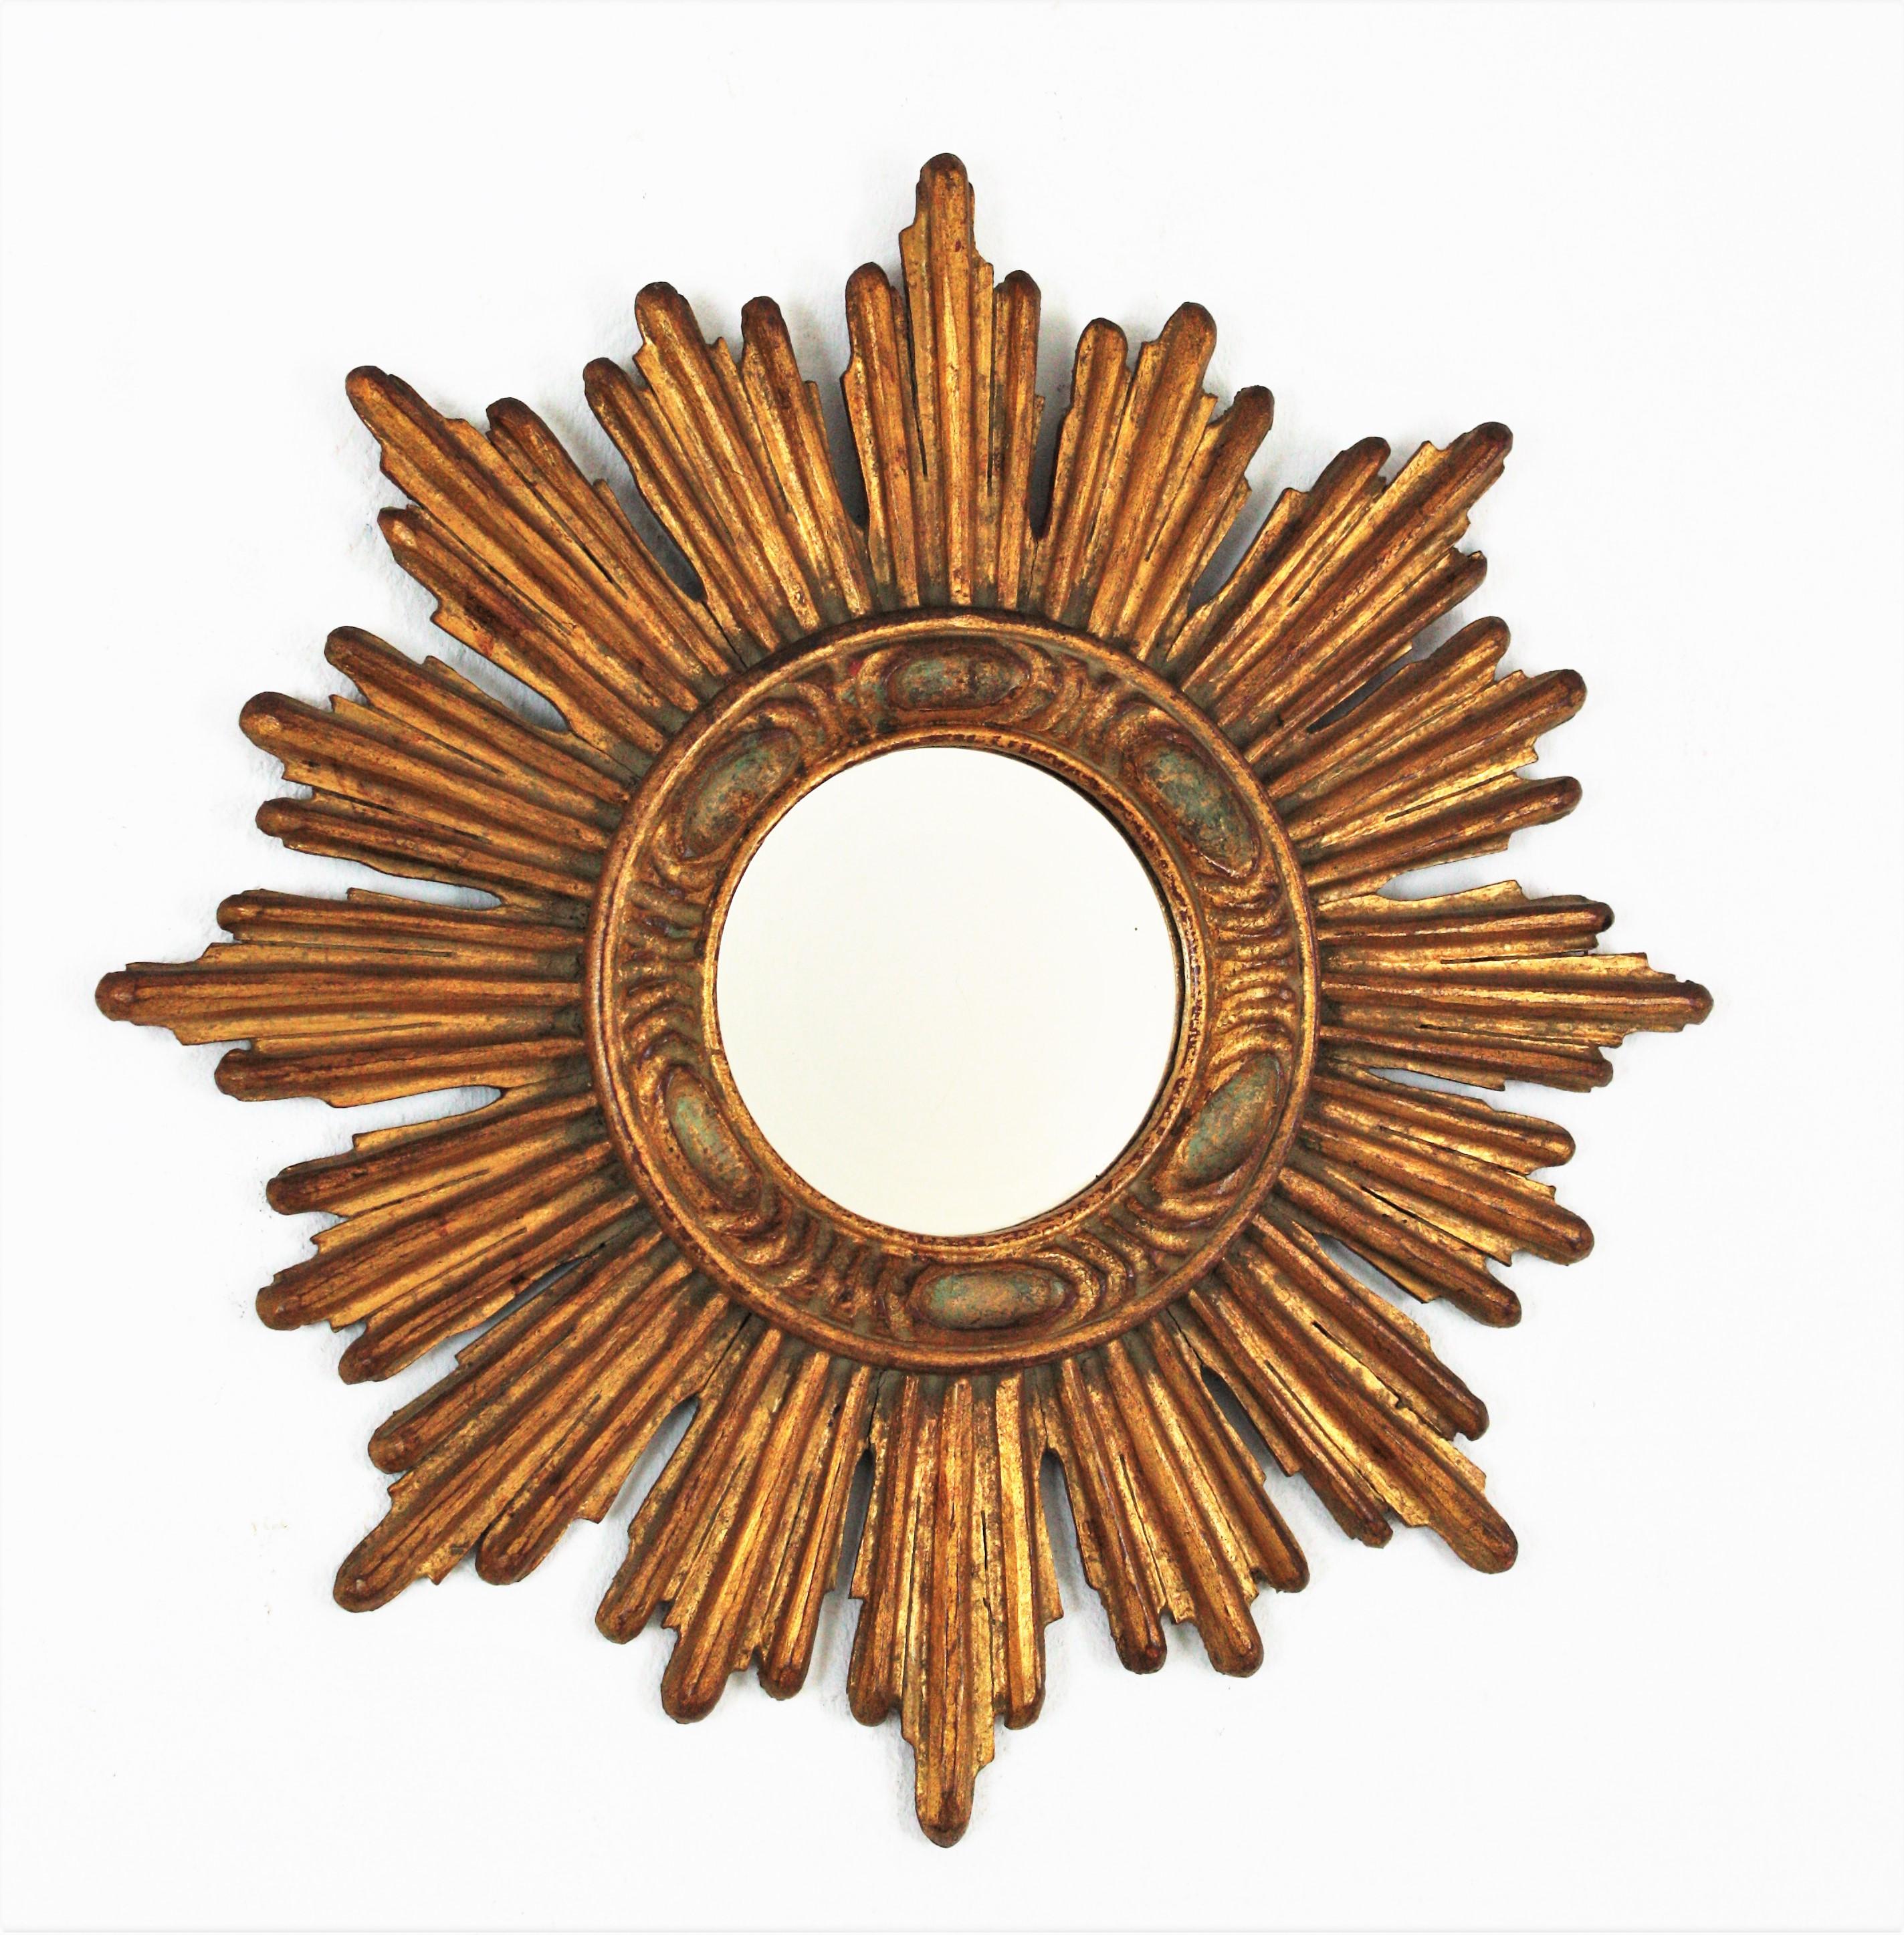 Sunburst mirror, carved wood, gold leaf, France, 1940s.
Elegant sunburst mirror with a frame comprised by alternating rays in two sizes with carving details thorough surrounding the central patterned frame and the round glass. It has a dramatic